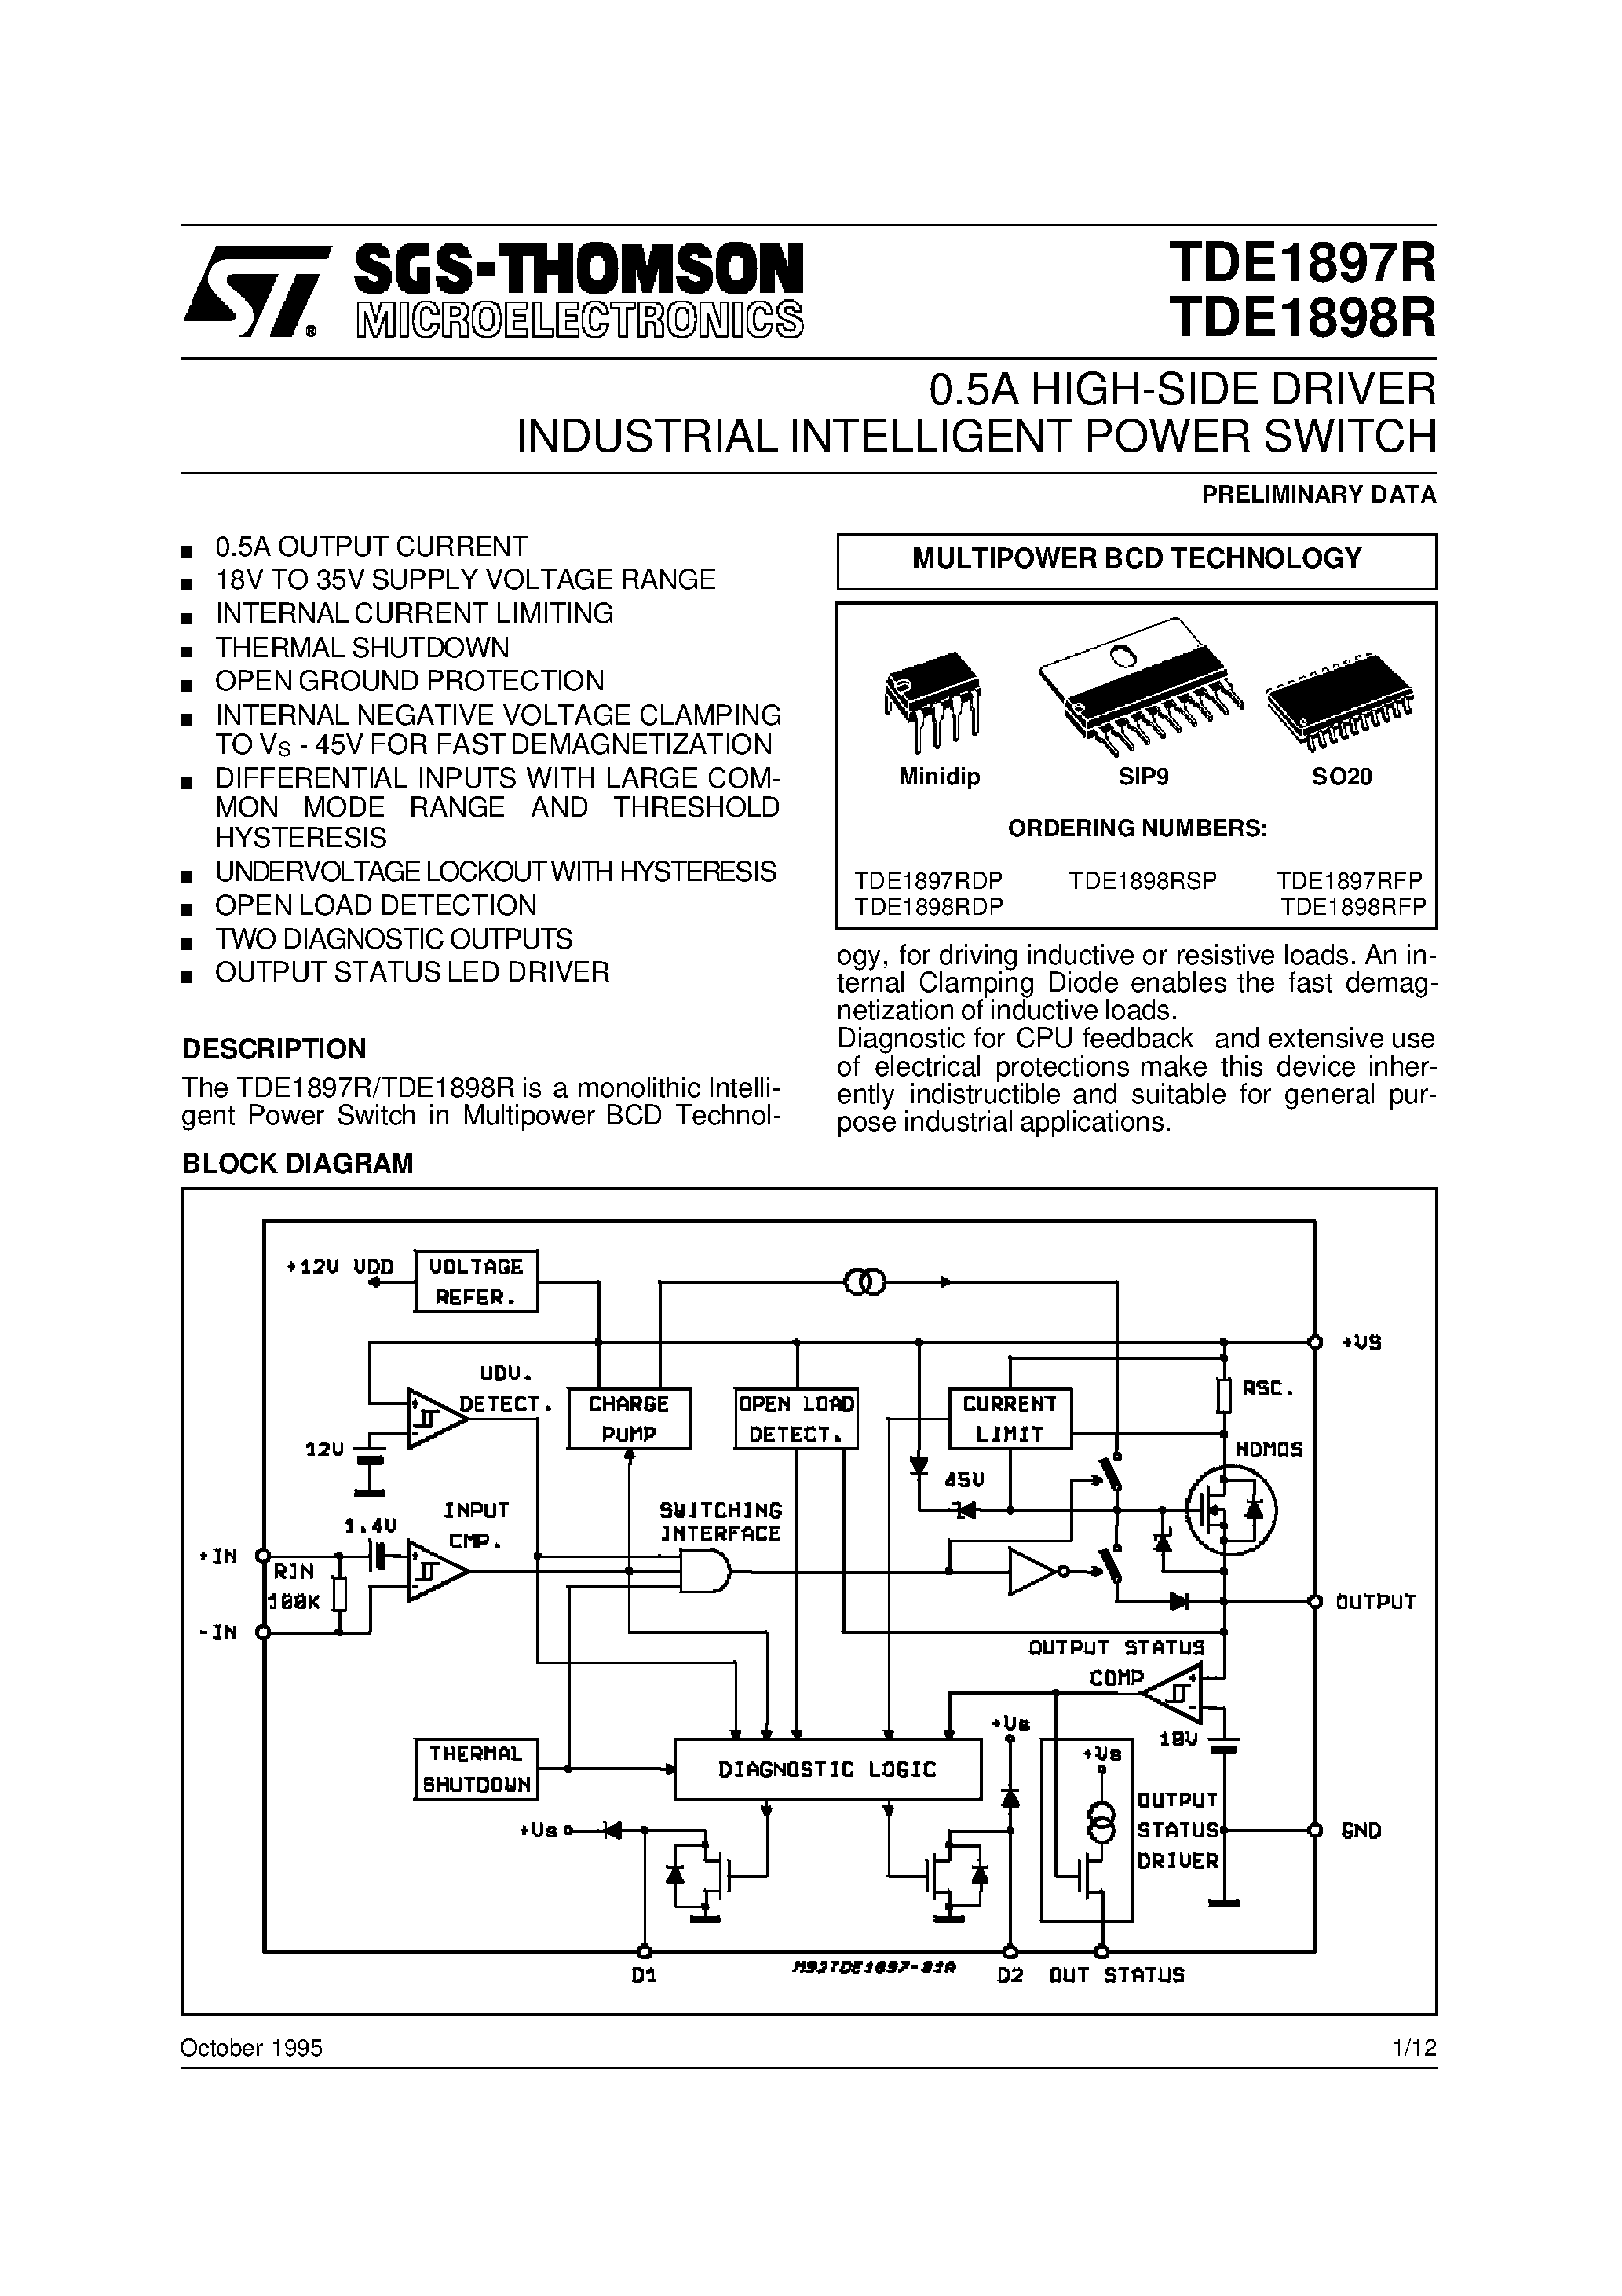 Datasheet TDE1897RFP - 0.5A HIGH-SIDE DRIVER INDUSTRIAL INTELLIGENT POWER SWITCH page 1